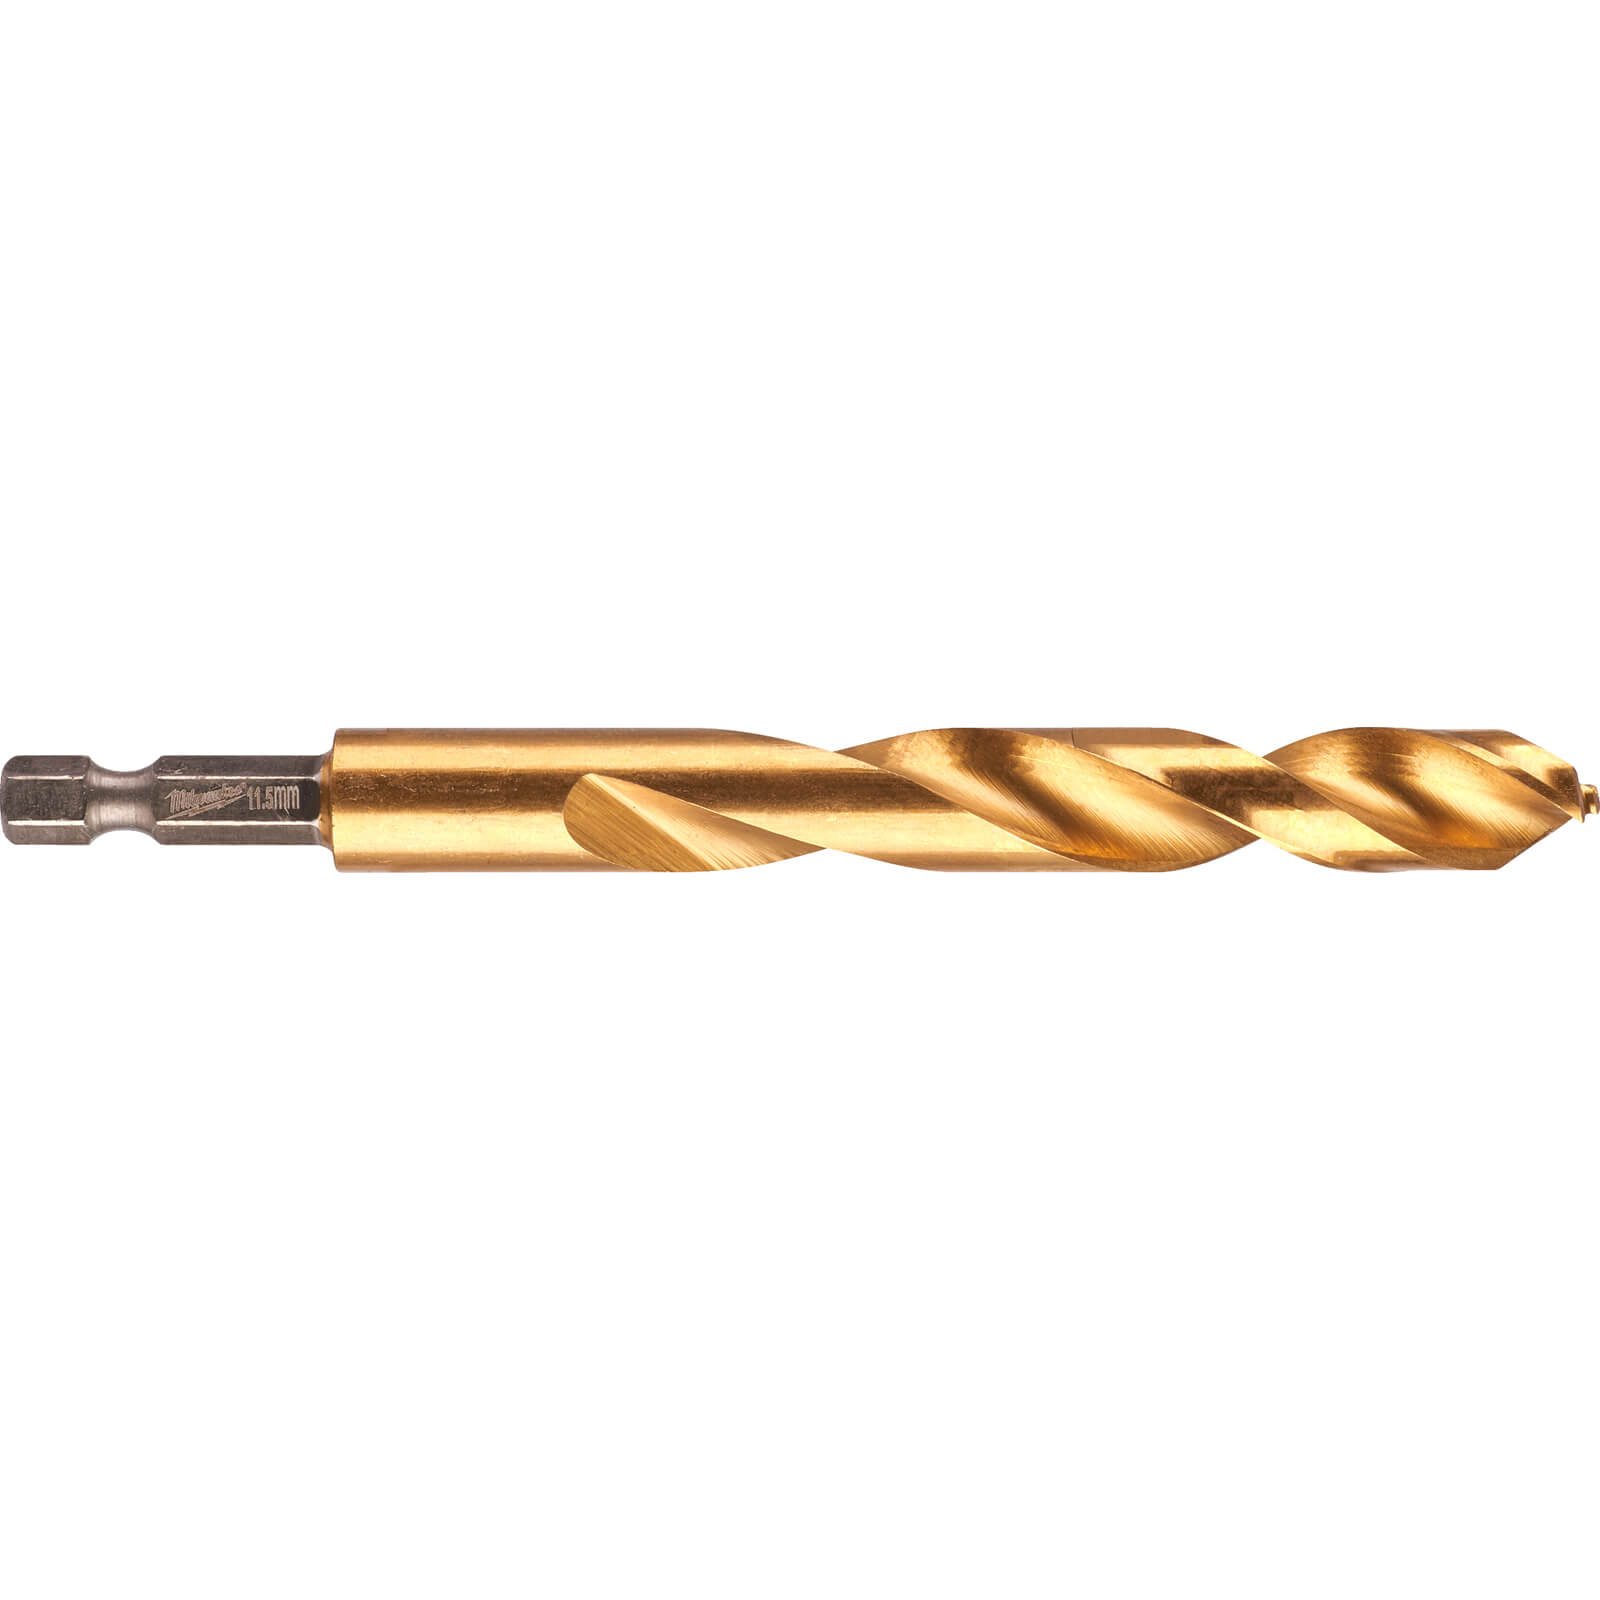 Image of Milwaukee HSS-G Shockwave Drill Bit 11.5mm Pack of 1